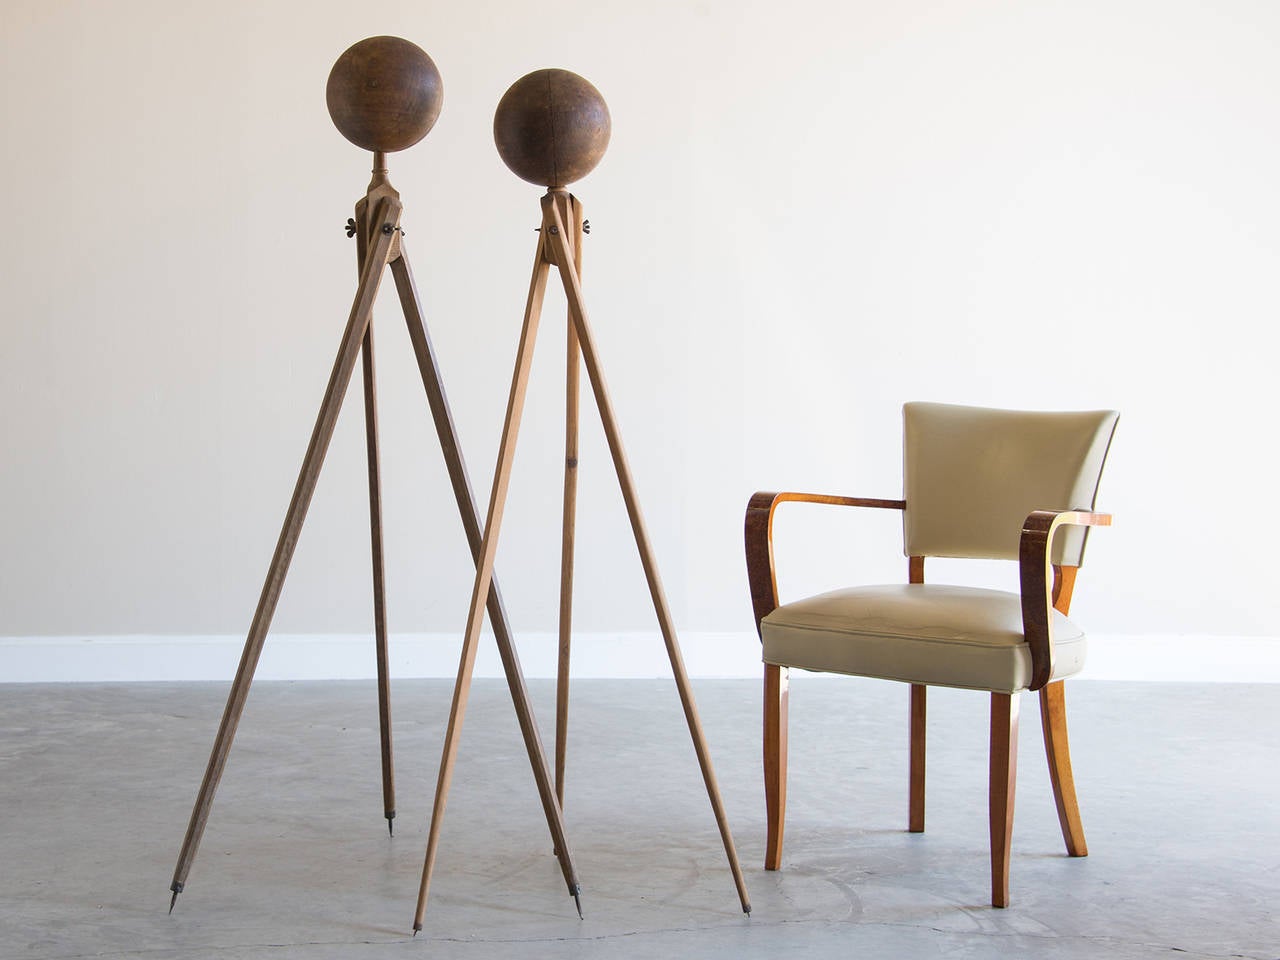 These intriguing sculptural objects possess a unique visual allure. The two vintage tripods were used by surveyors when measuring distance but have now been fitted with hand hewn spheres of solid timber. The warmth of the wood is quite alluring and